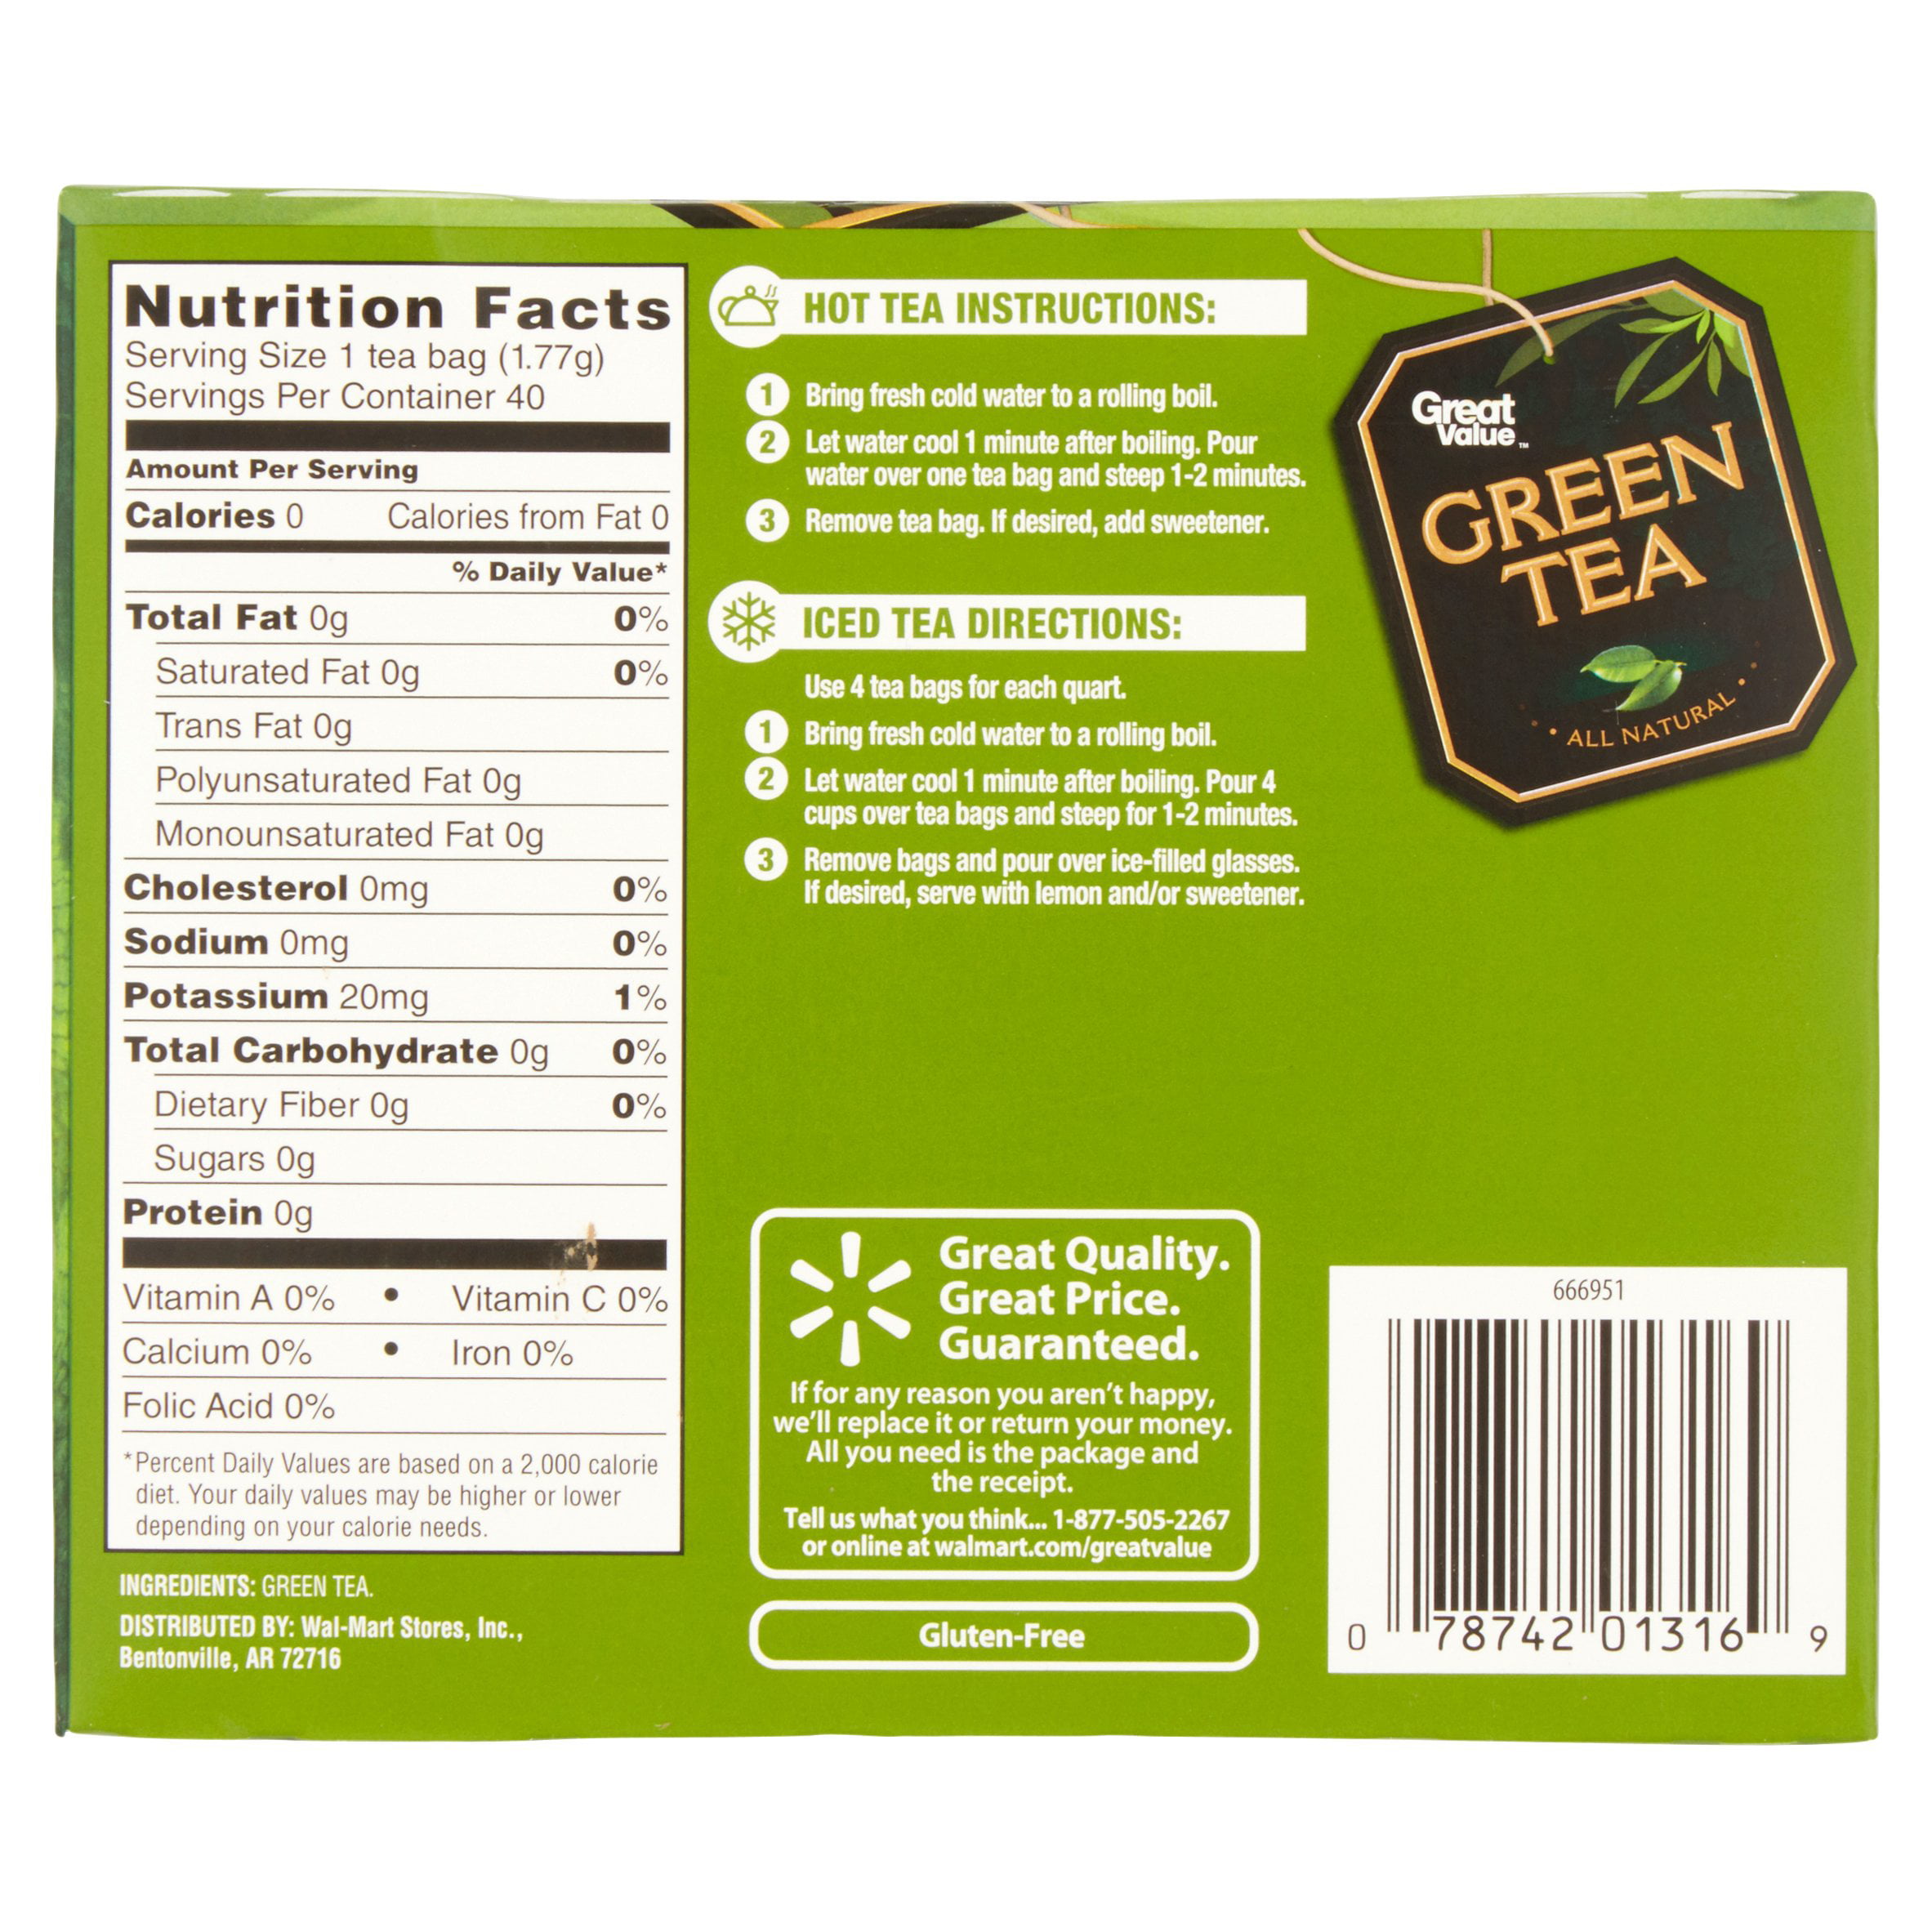 Green tea nutrition facts